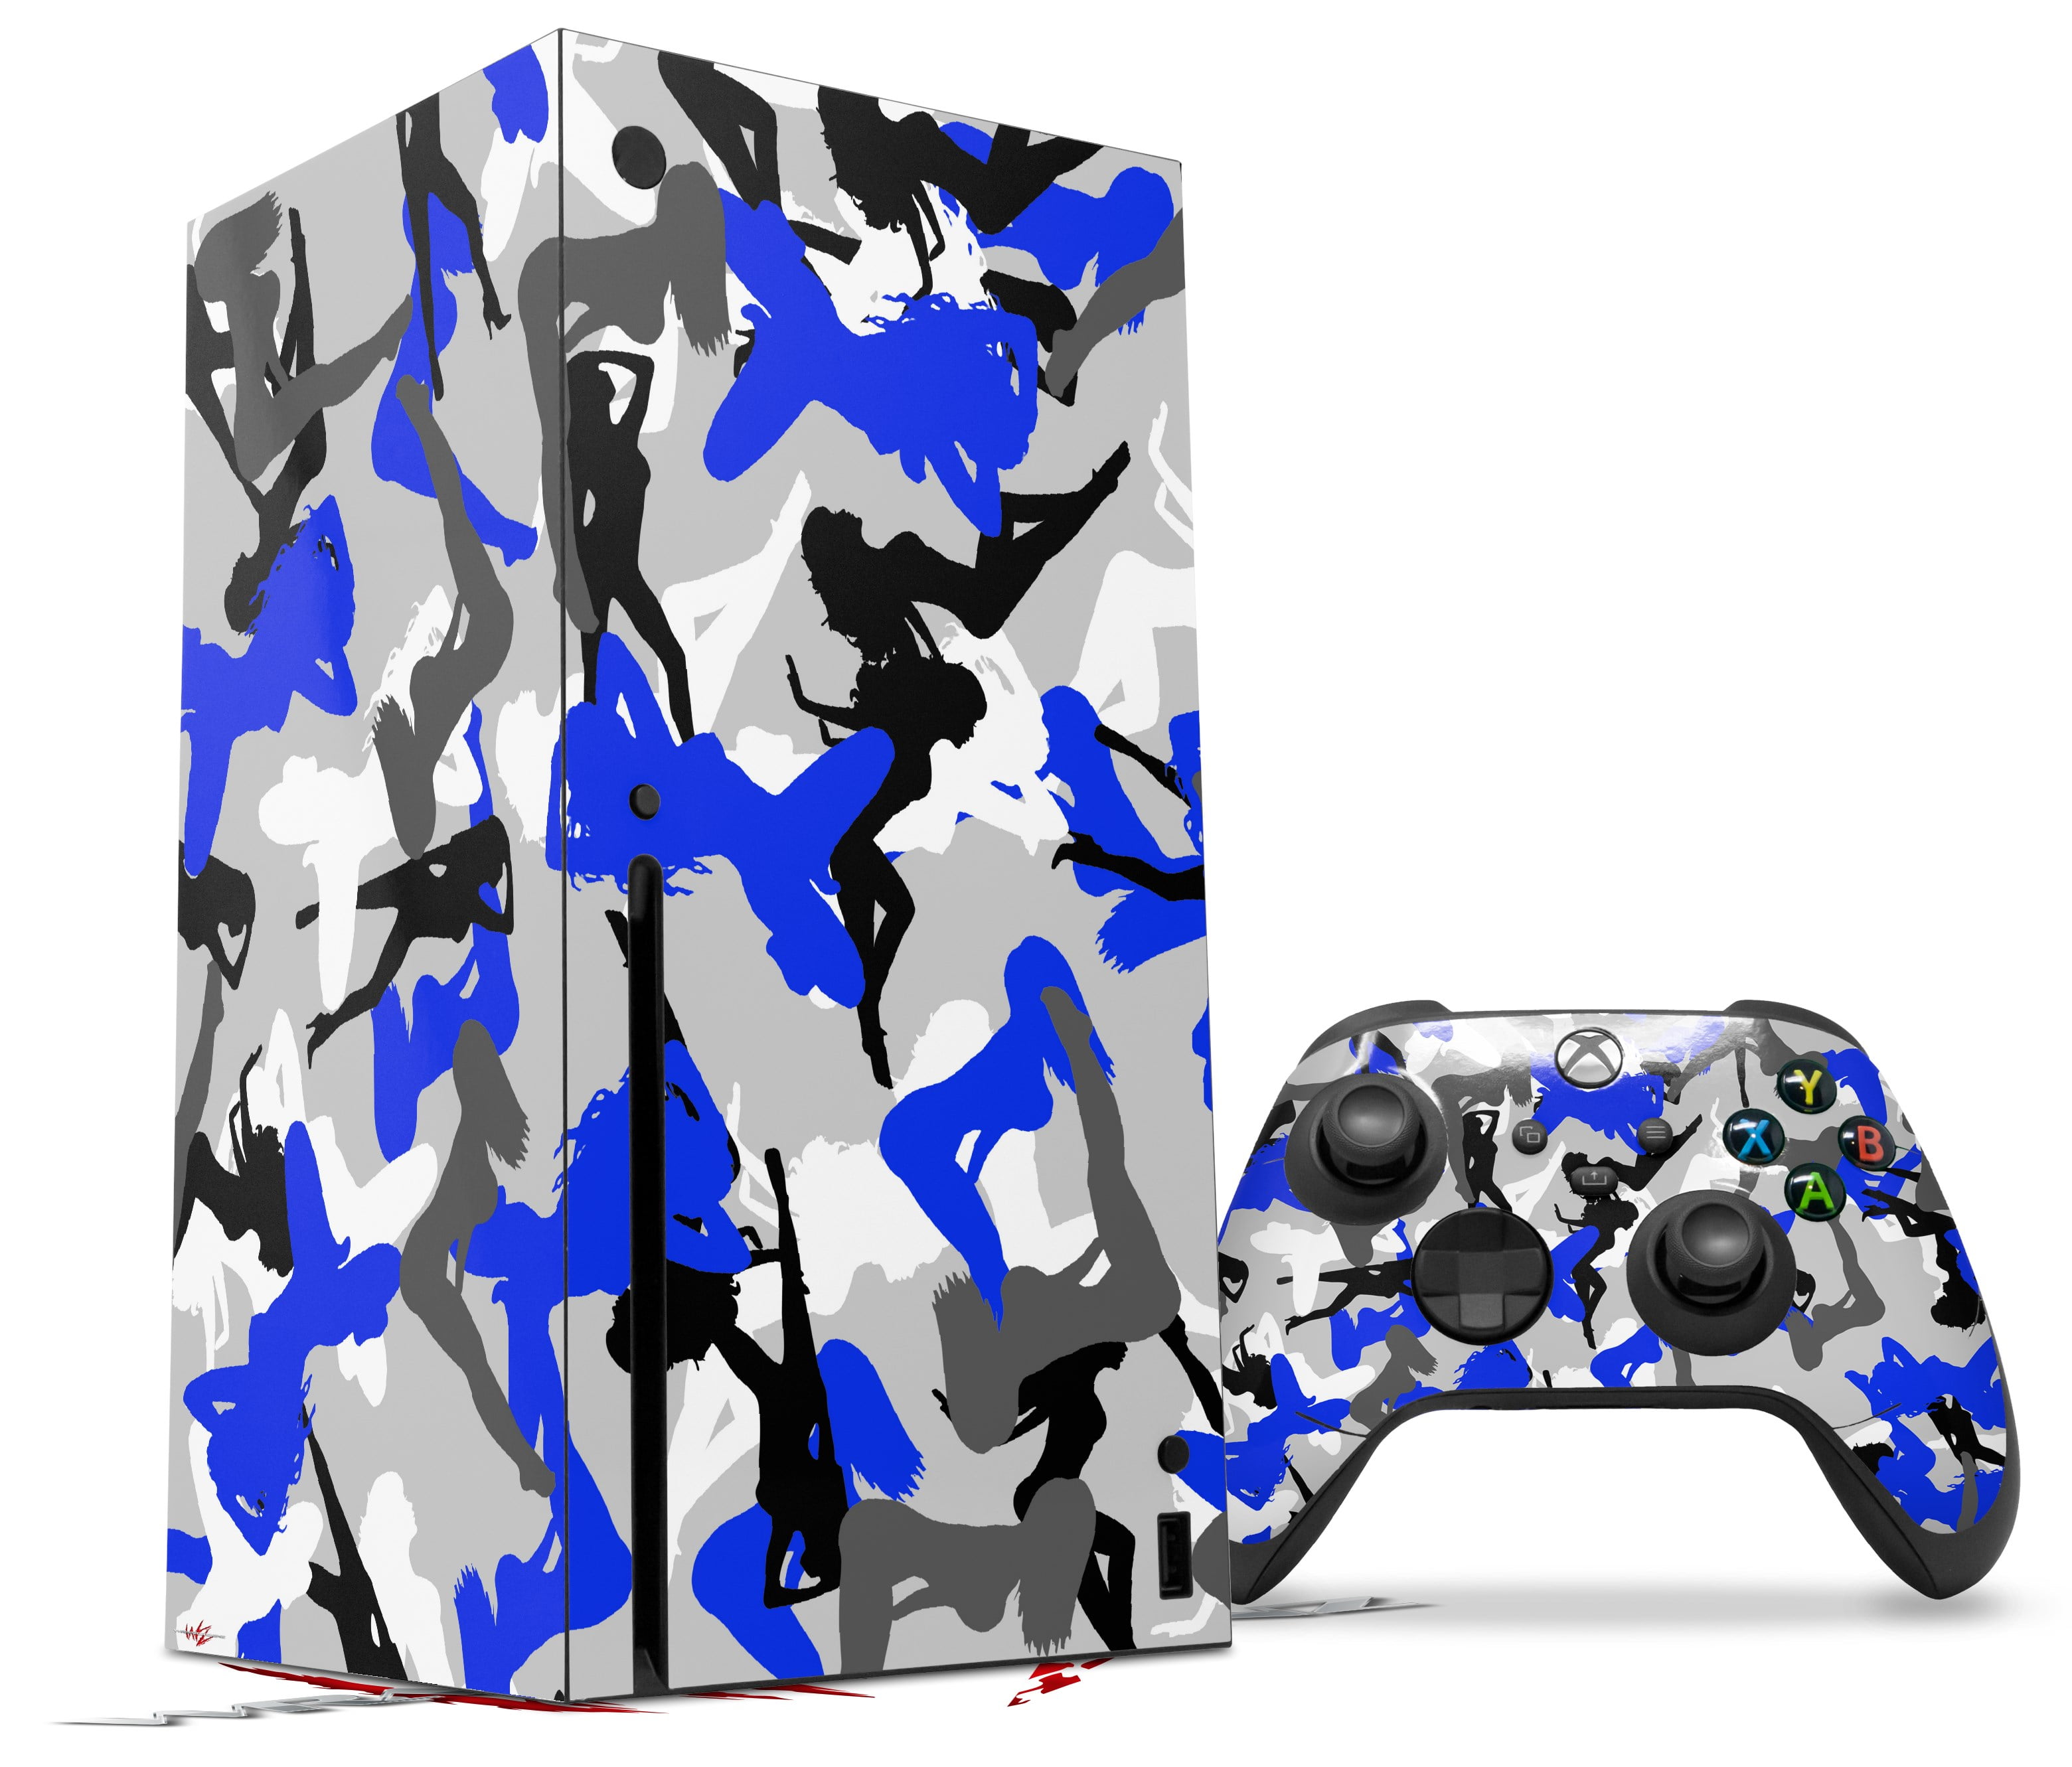 WraptorSkinz Skin Wrap compatible with the 2020 XBOX Series X Console and  Controller Sexy Girl Silhouette Camo Blue (XBOX NOT INCLUDED)